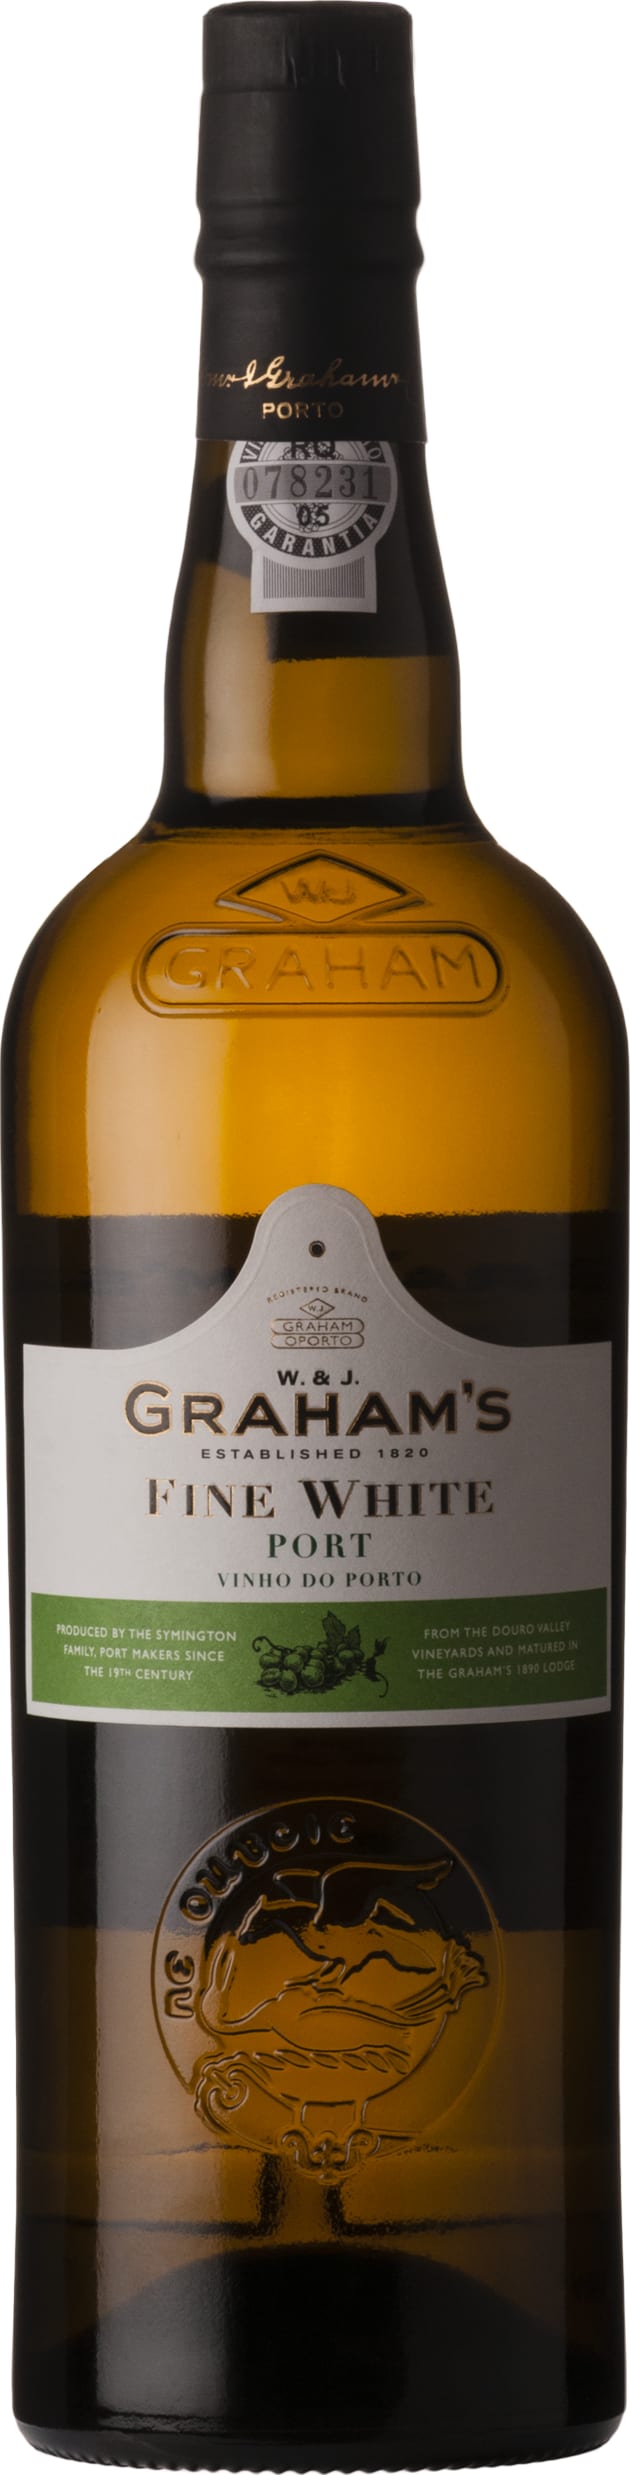 Graham's Fine White Port 75cl NV - Buy Graham's Wines from GREAT WINES DIRECT wine shop